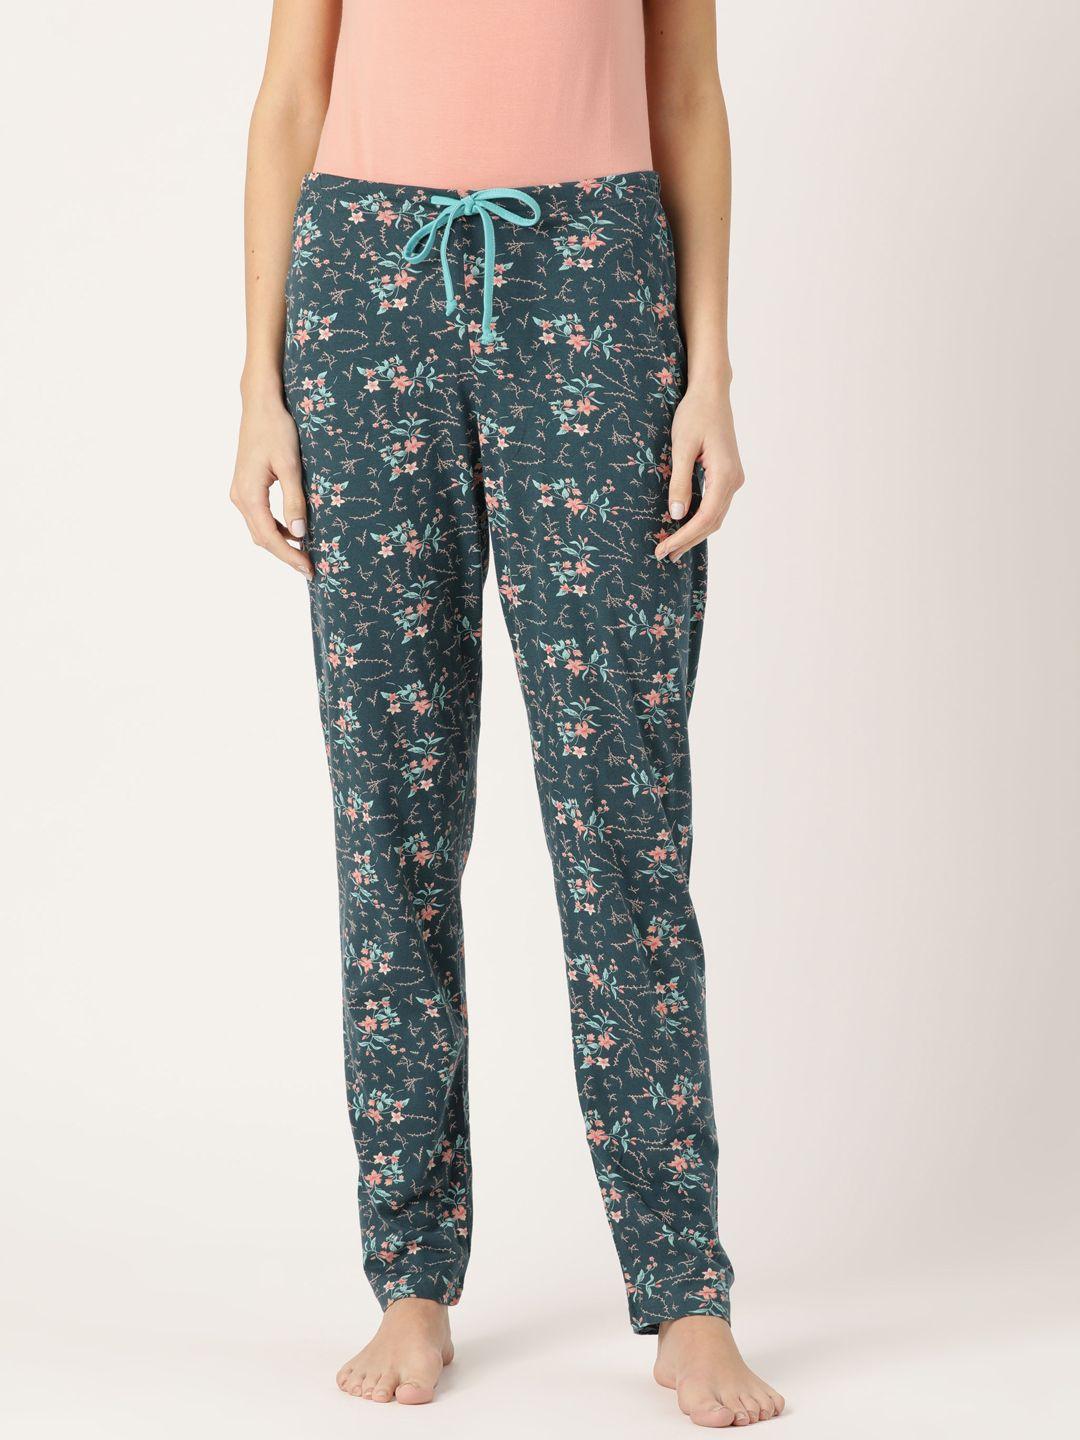 kanvin-women-teal-blue-&-peach-coloured-floral-printed-lounge-pants